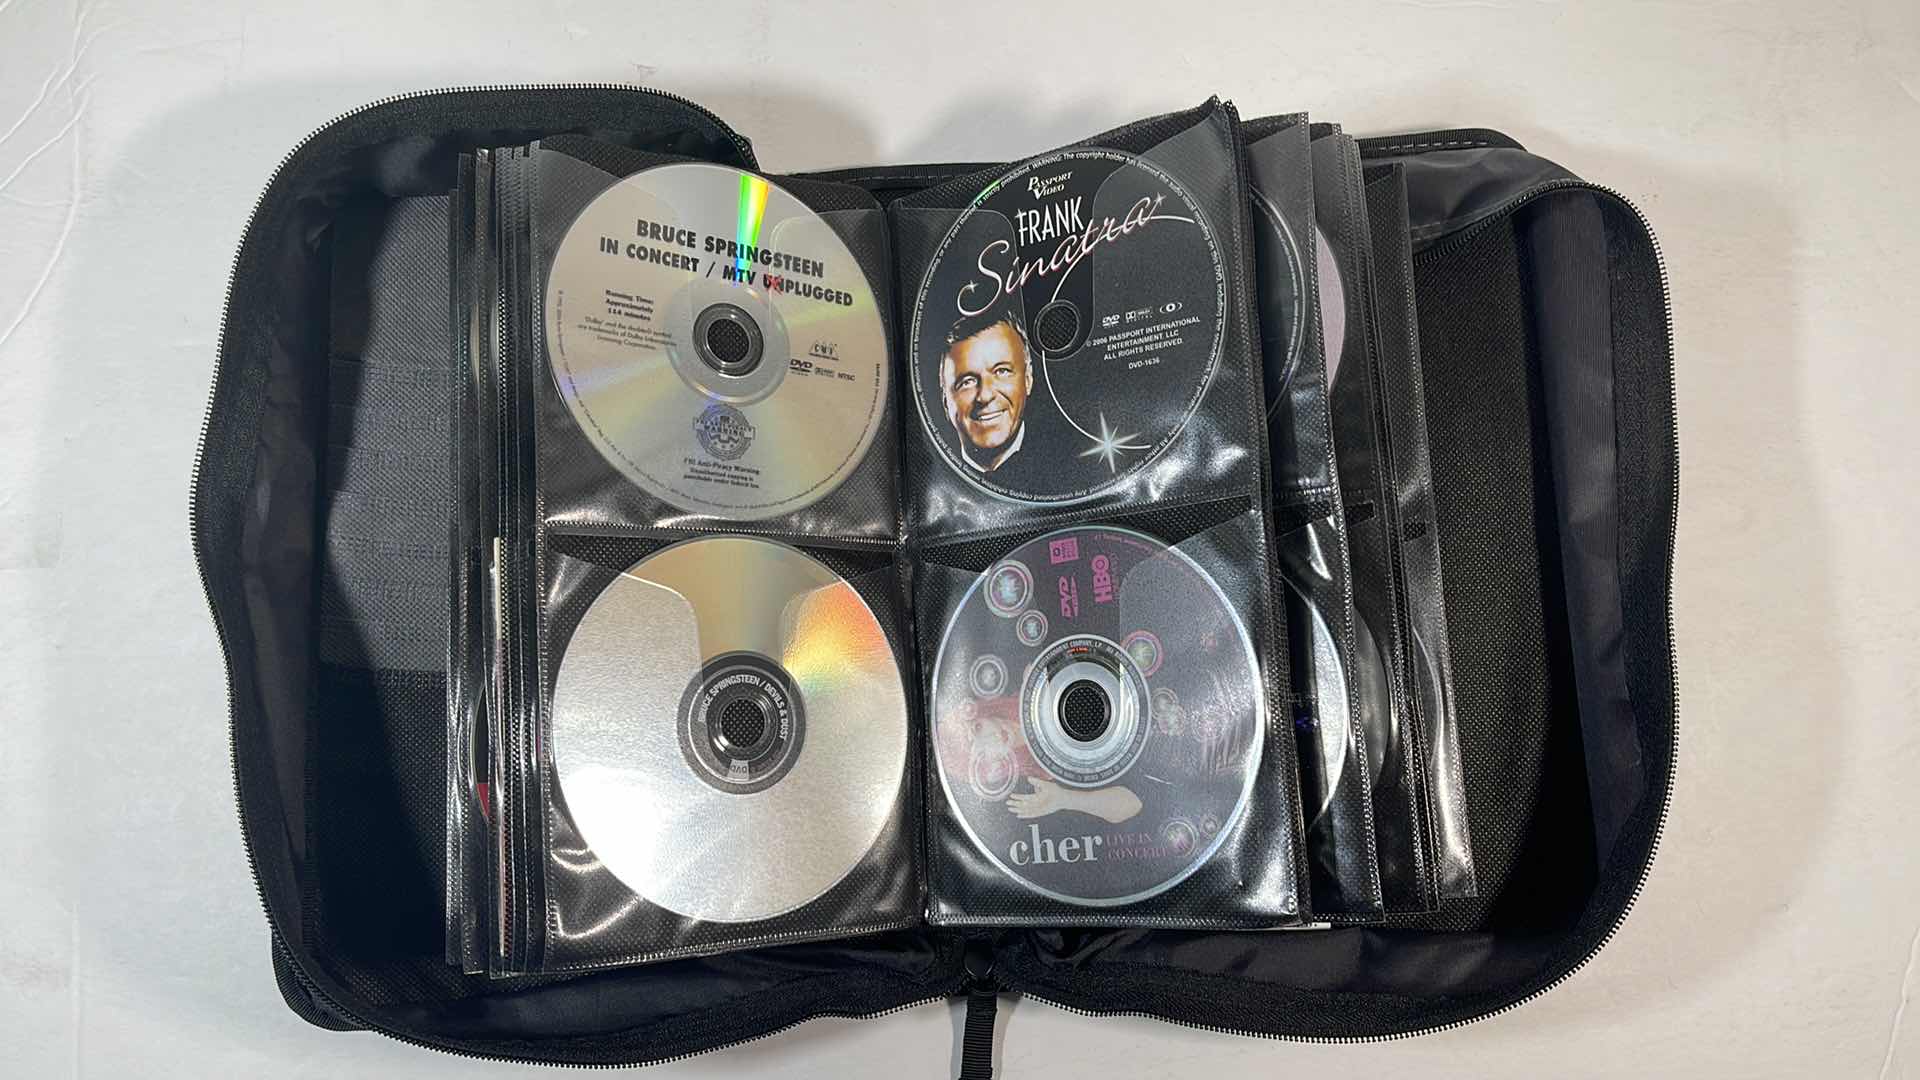 Photo 4 of CONCERT/VIDEO MUSIC CD/DVDS VARIOUS & CASE LOGIC CARRY CASE